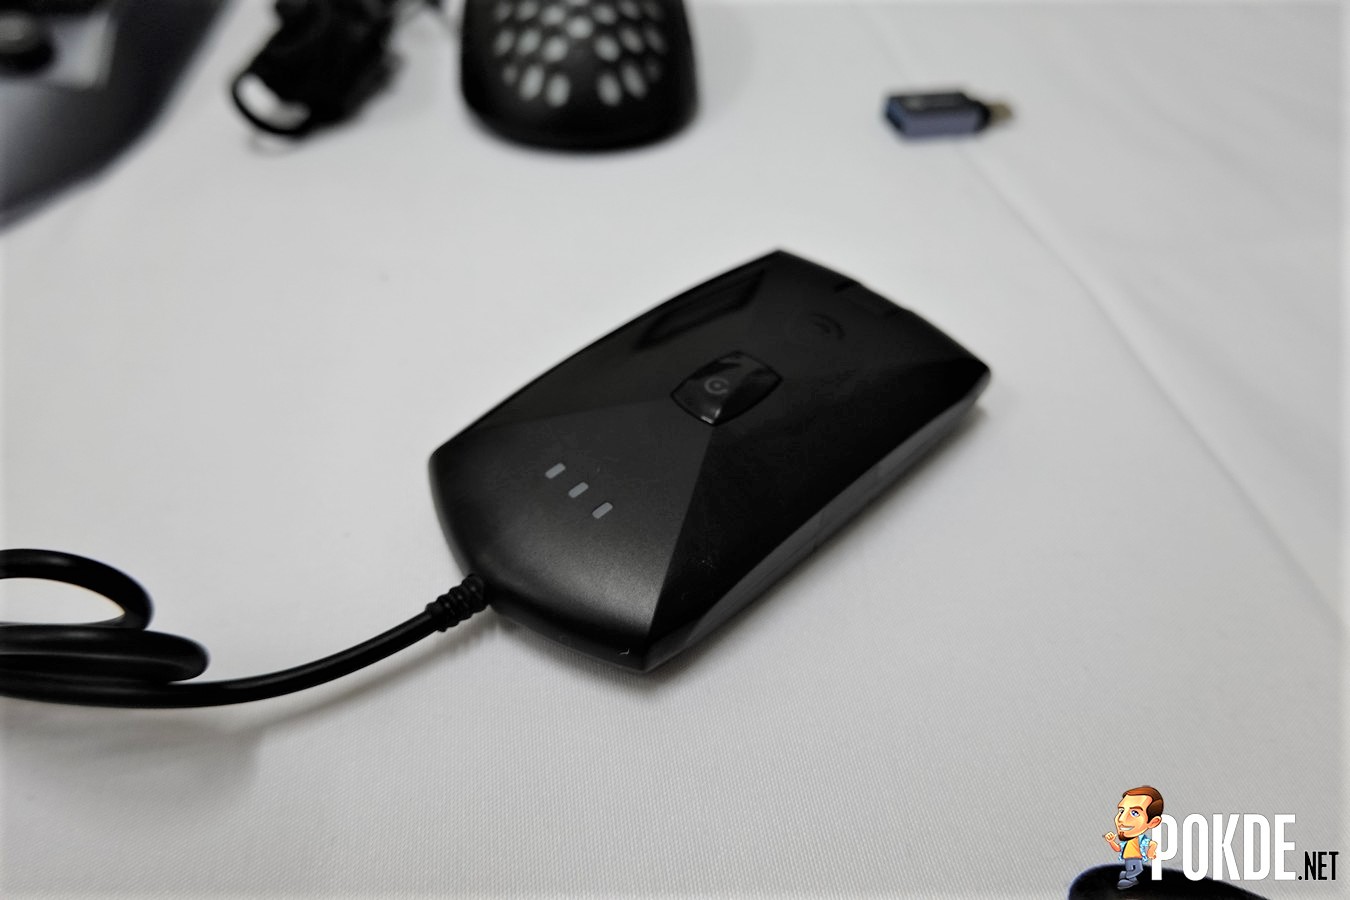 Gamesir Vx2 Aimswitch Review Bringing The Best Of Pc Gaming To Console Pokde Net